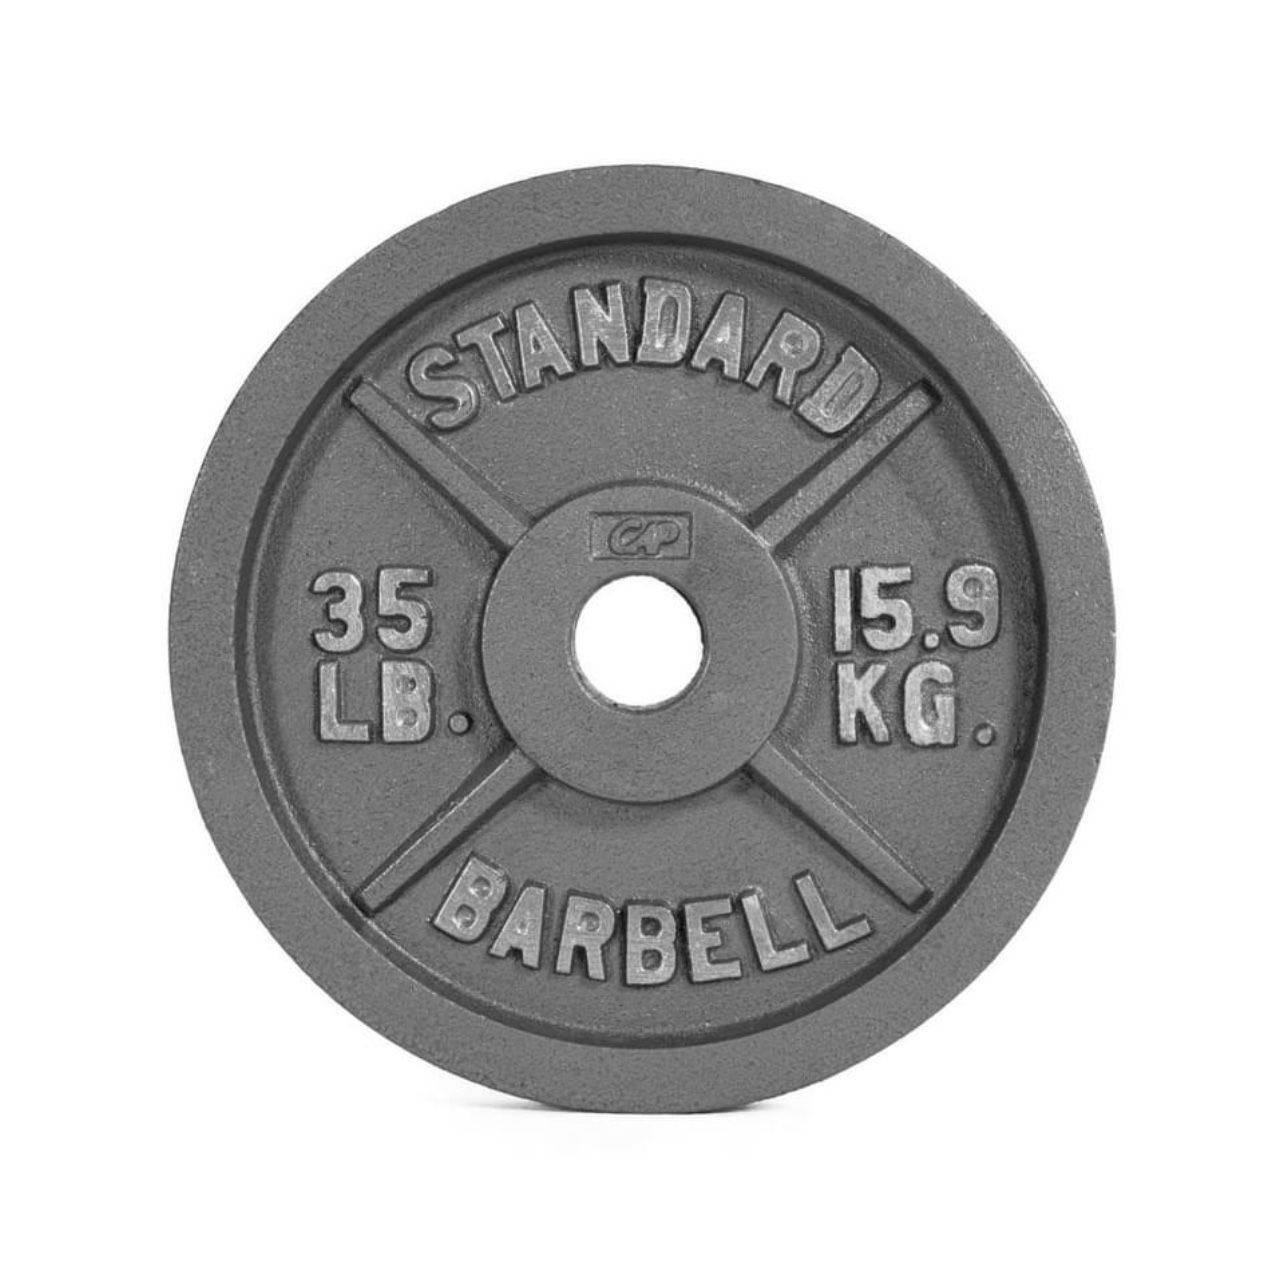 Barbell Gray Olympic Cast Iron Weight Plate, 35 lb, Single